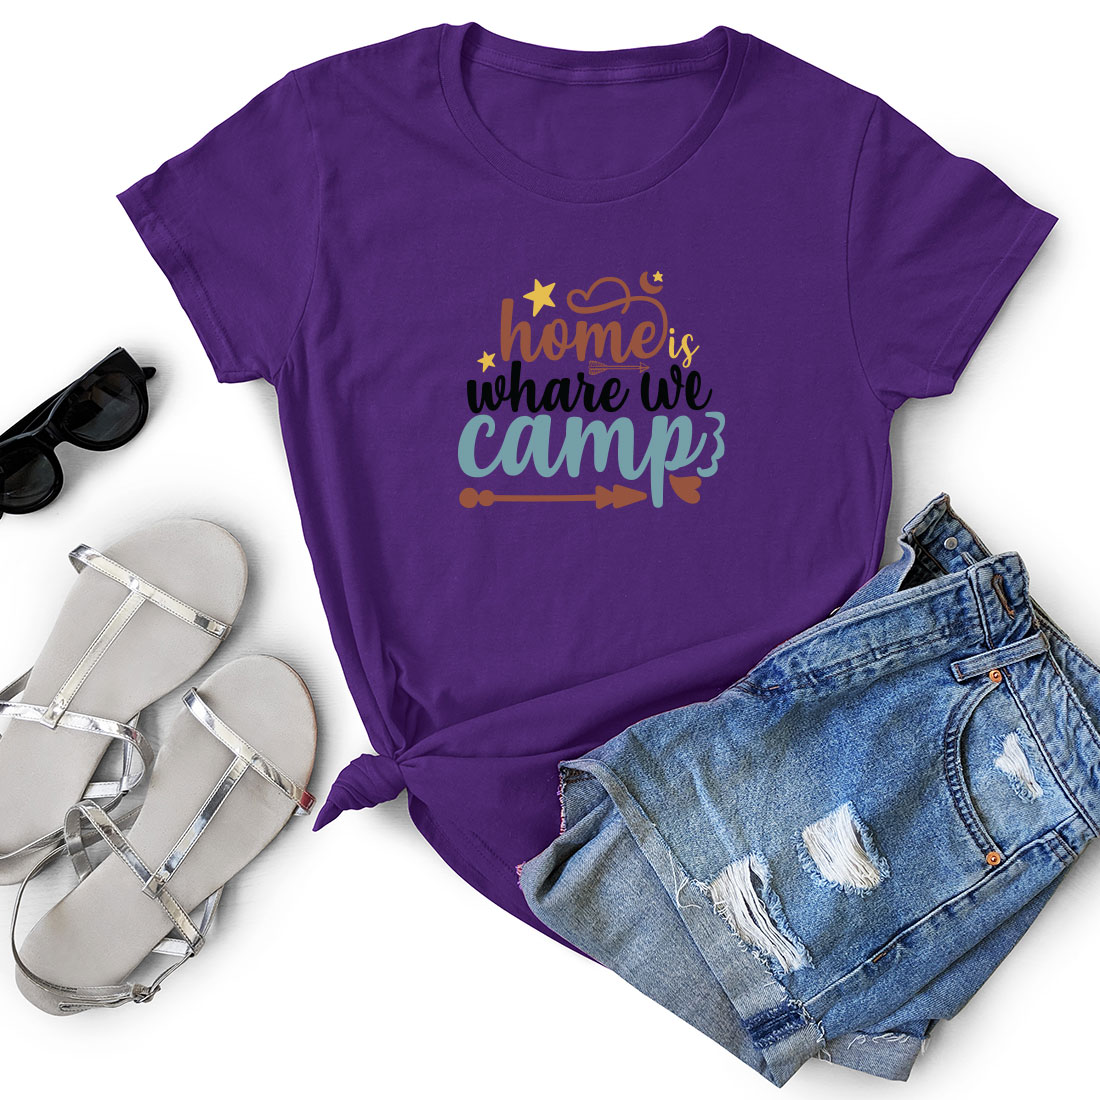 Purple shirt that says home is where we camps.